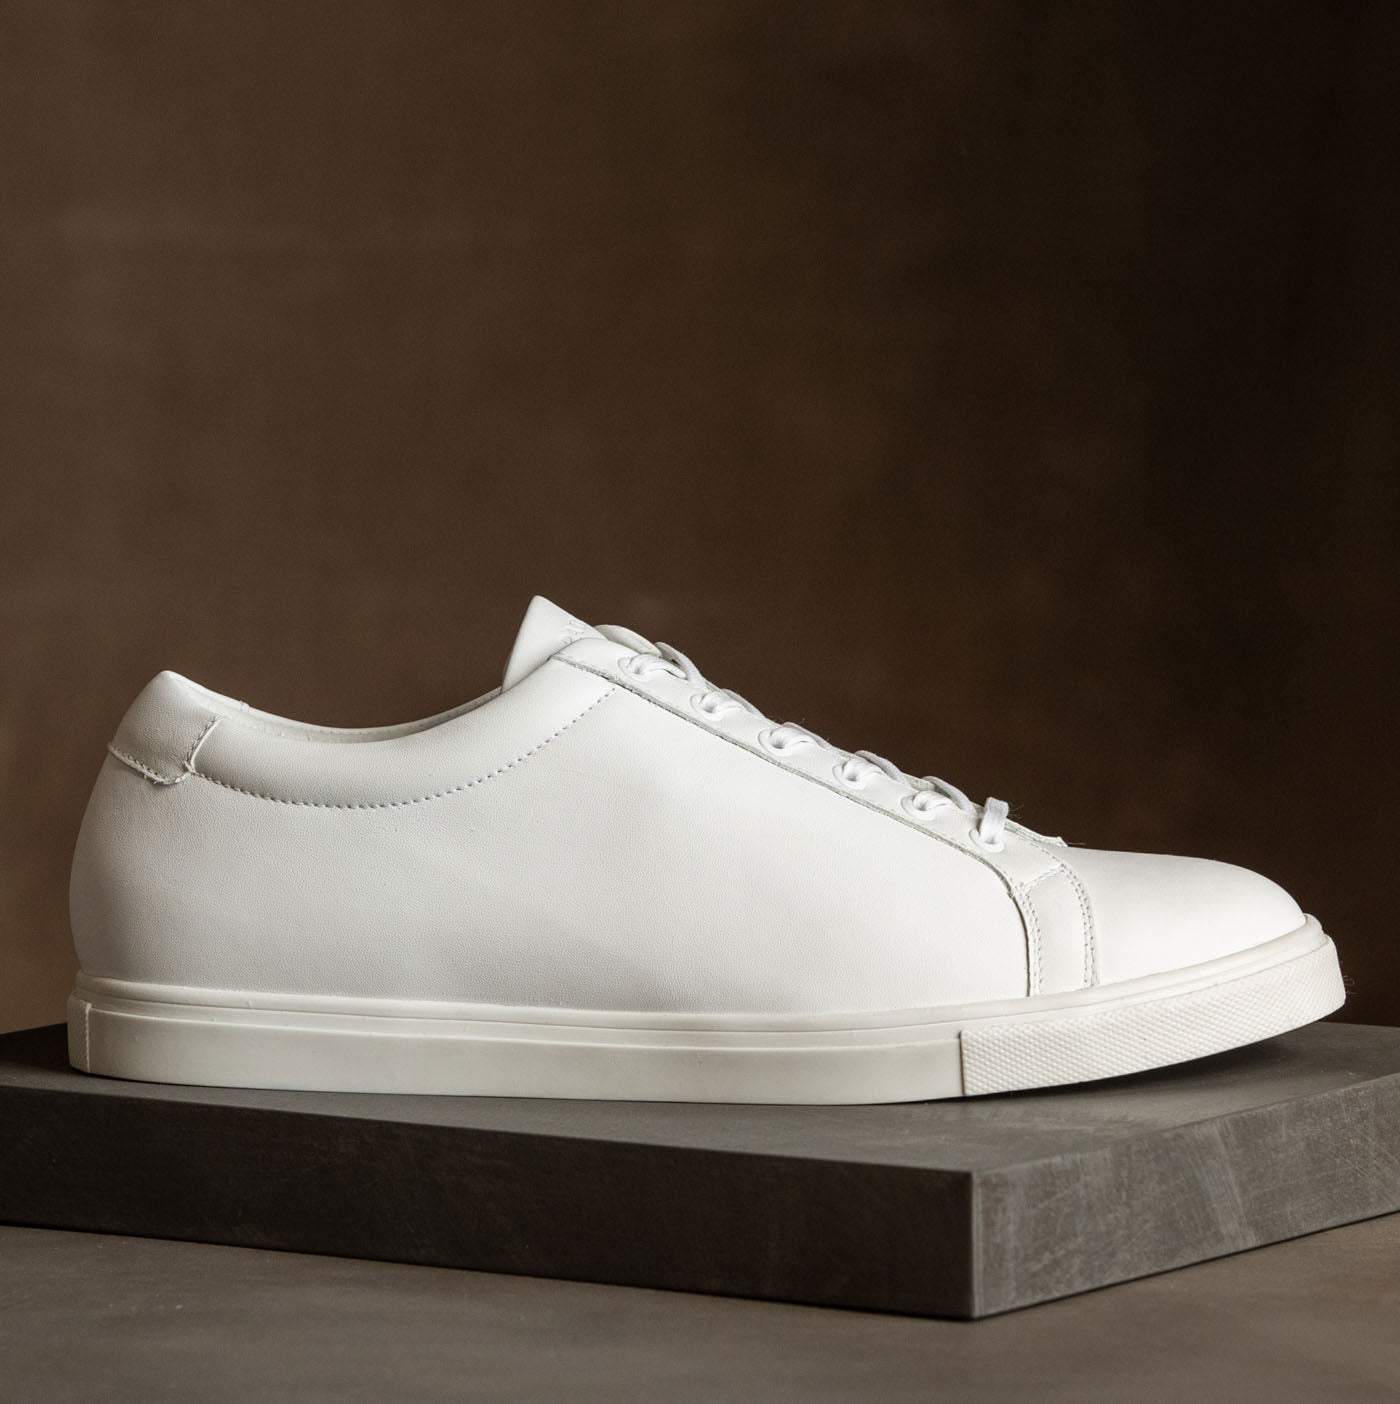 ECCO® Stylish Sneakers for Men - Shop Online Now